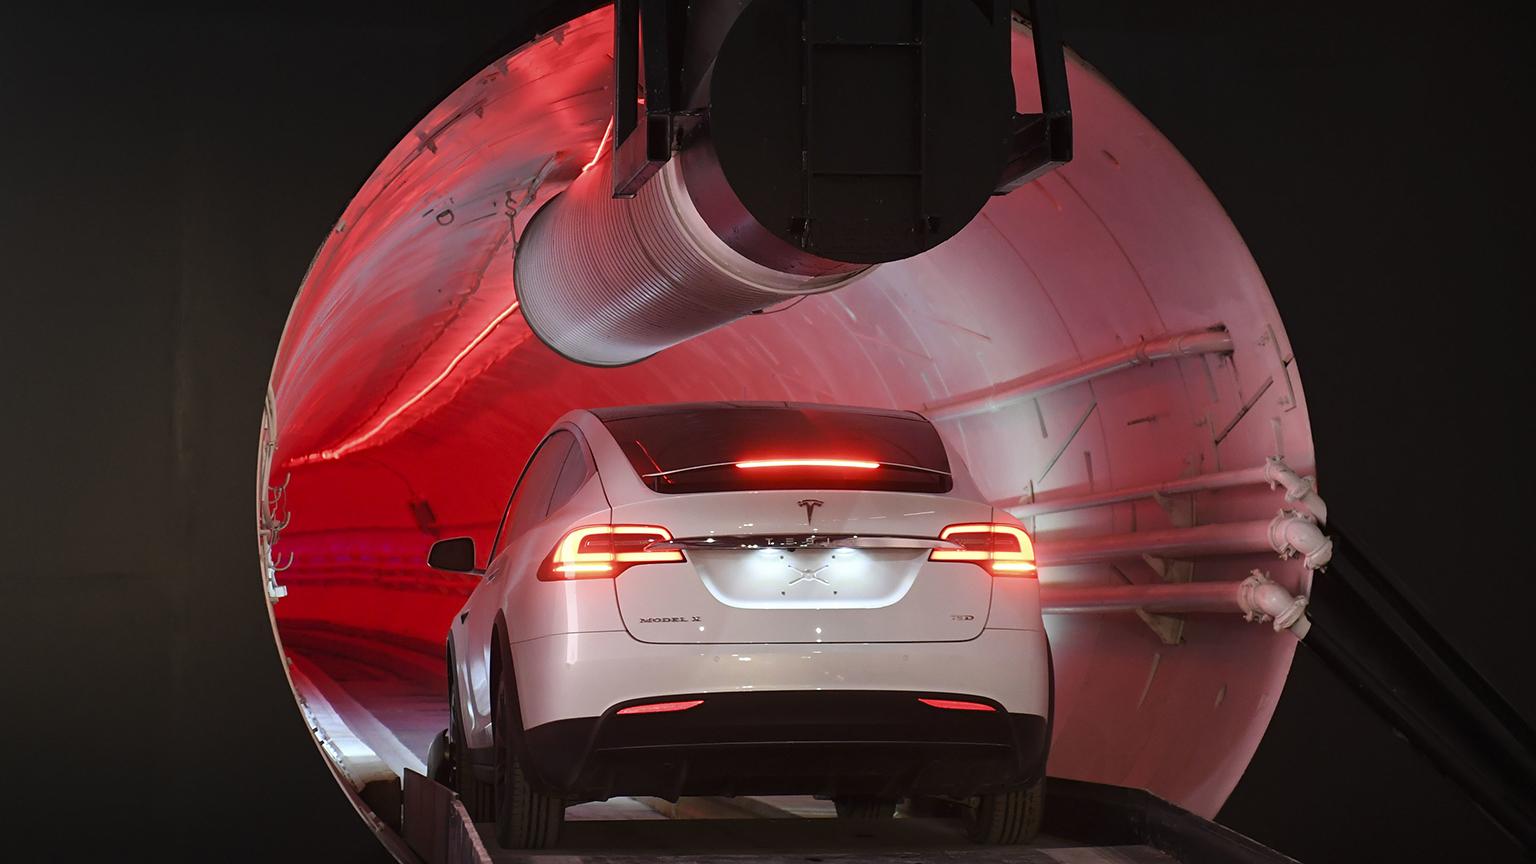 A modified Tesla Model X drives in the tunnel entrance before an unveiling event on Tuesday, Dec. 18, 2018 for the Boring Co. Hawthorne test tunnel in Hawthorne, Calif. (Robyn Beck / Pool Photo via AP)